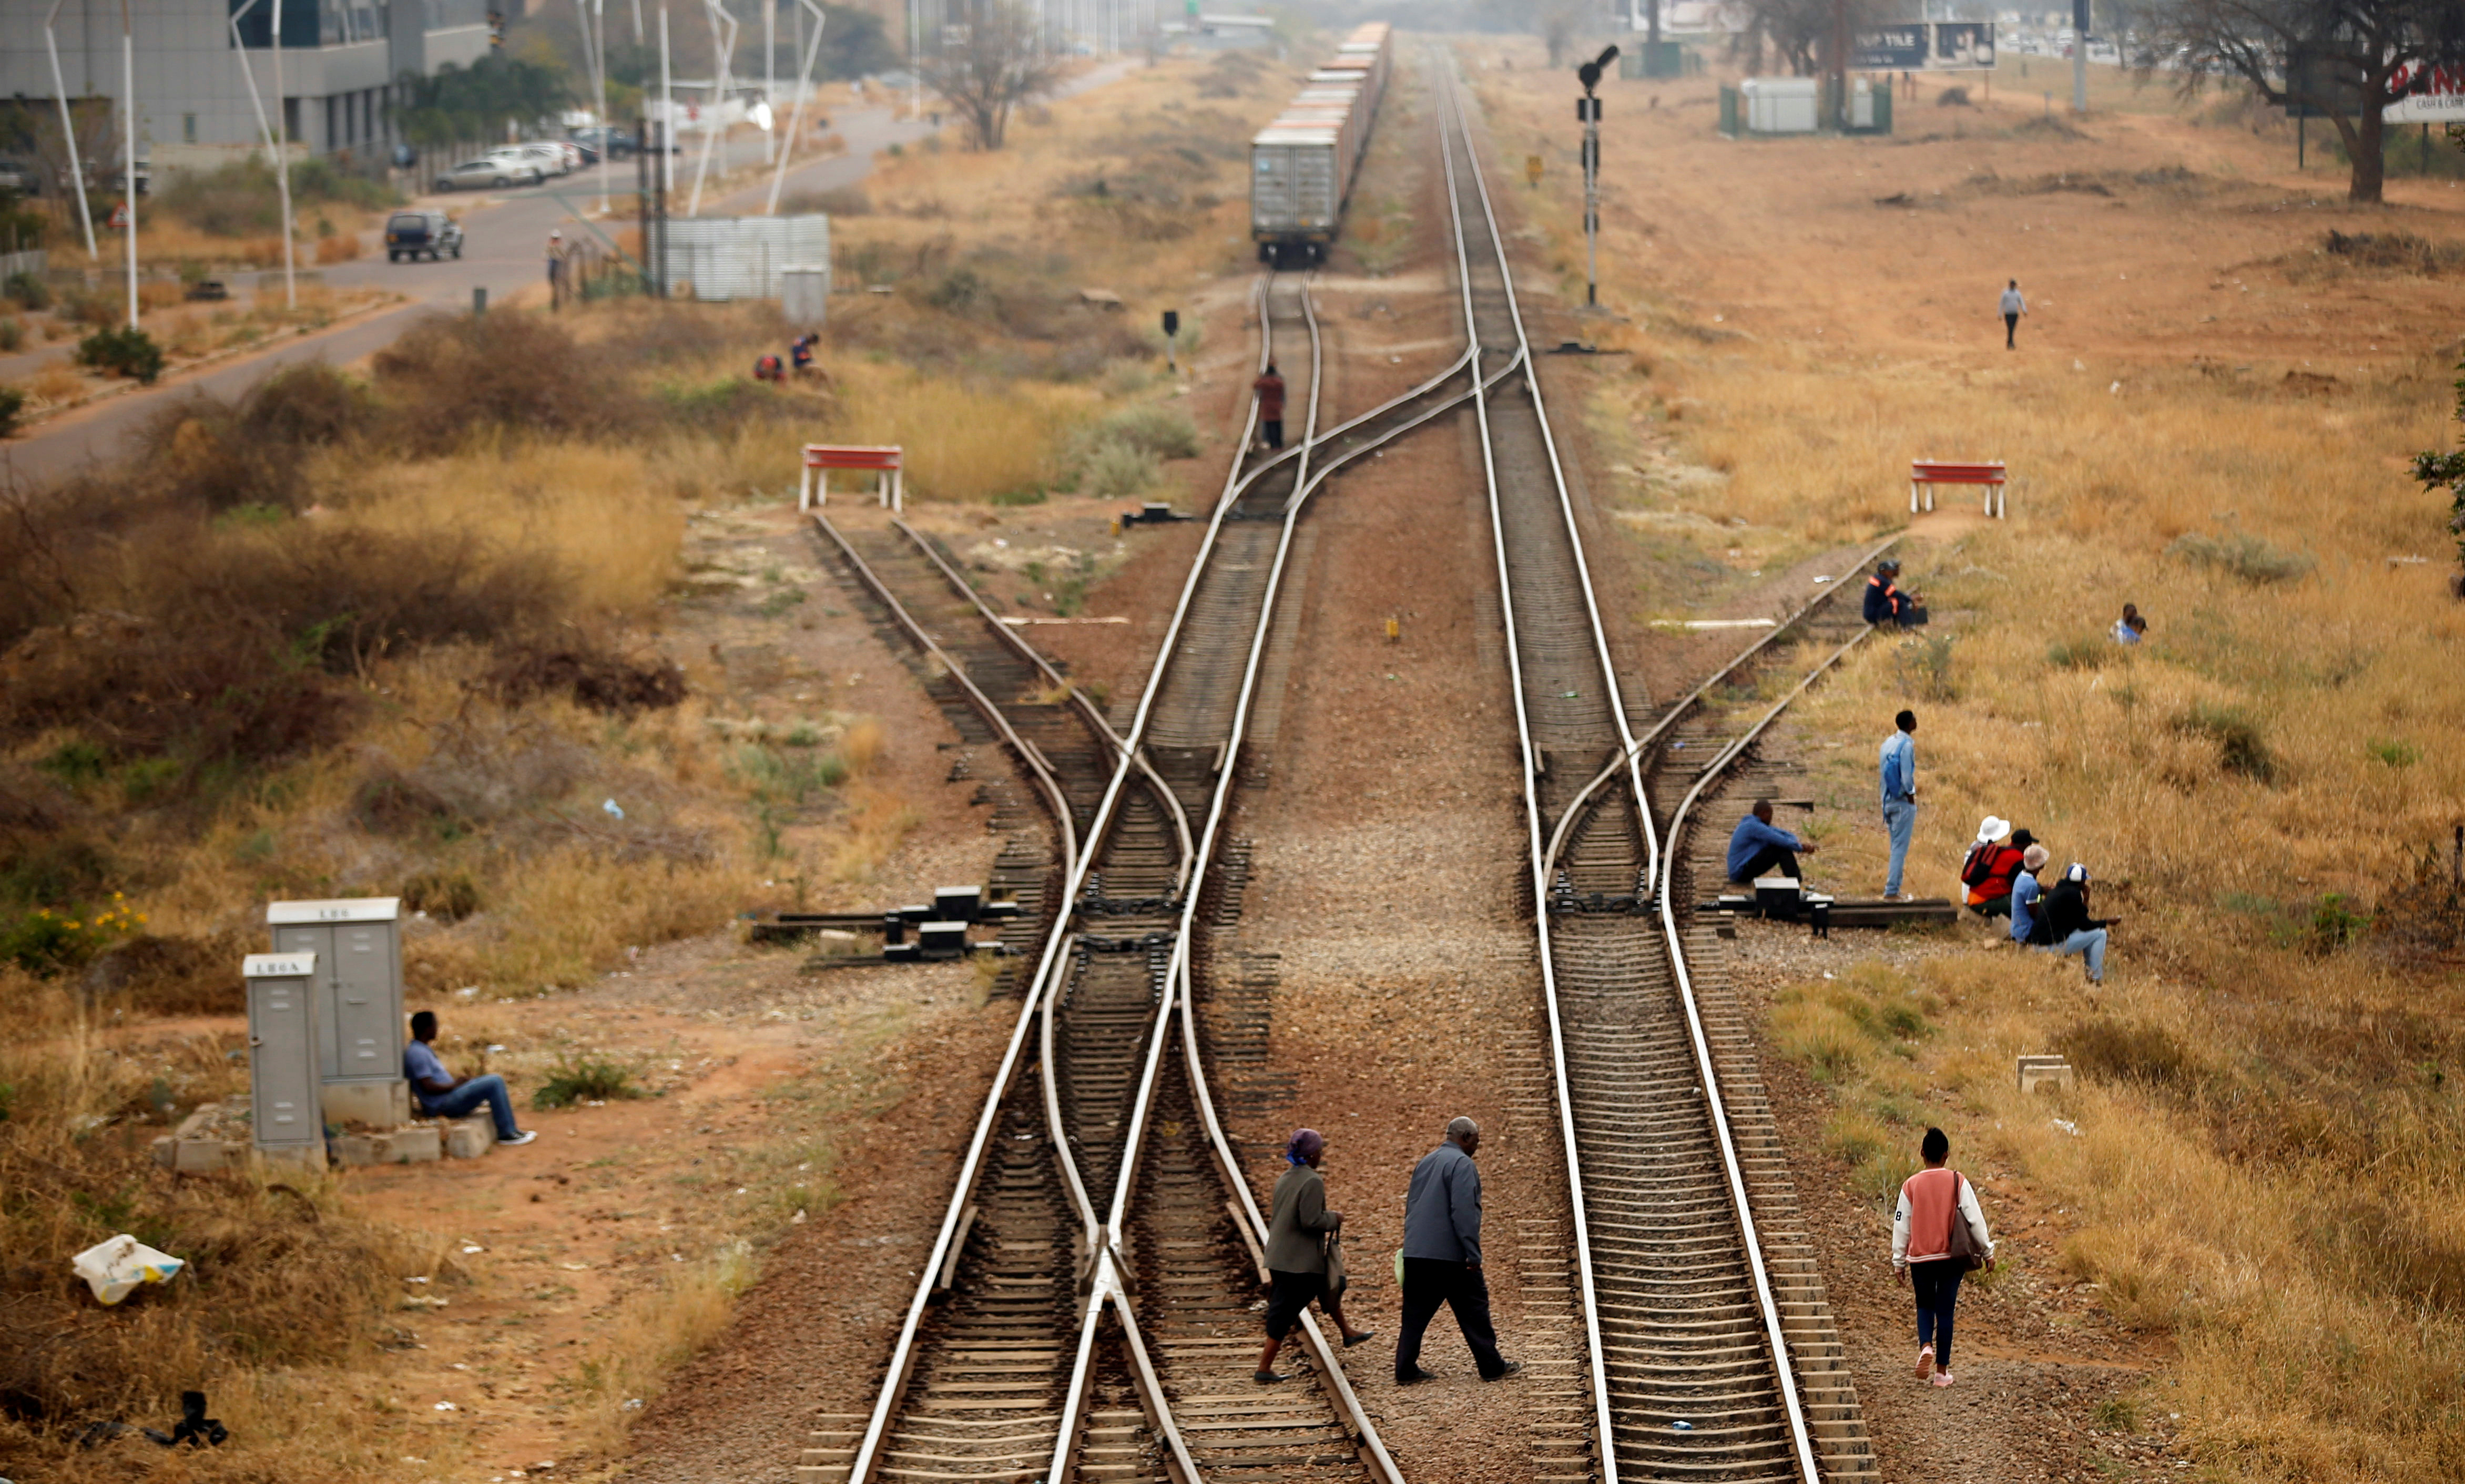 People cross rail tracks in the Central Business District (CBD), in the capital Gaborone